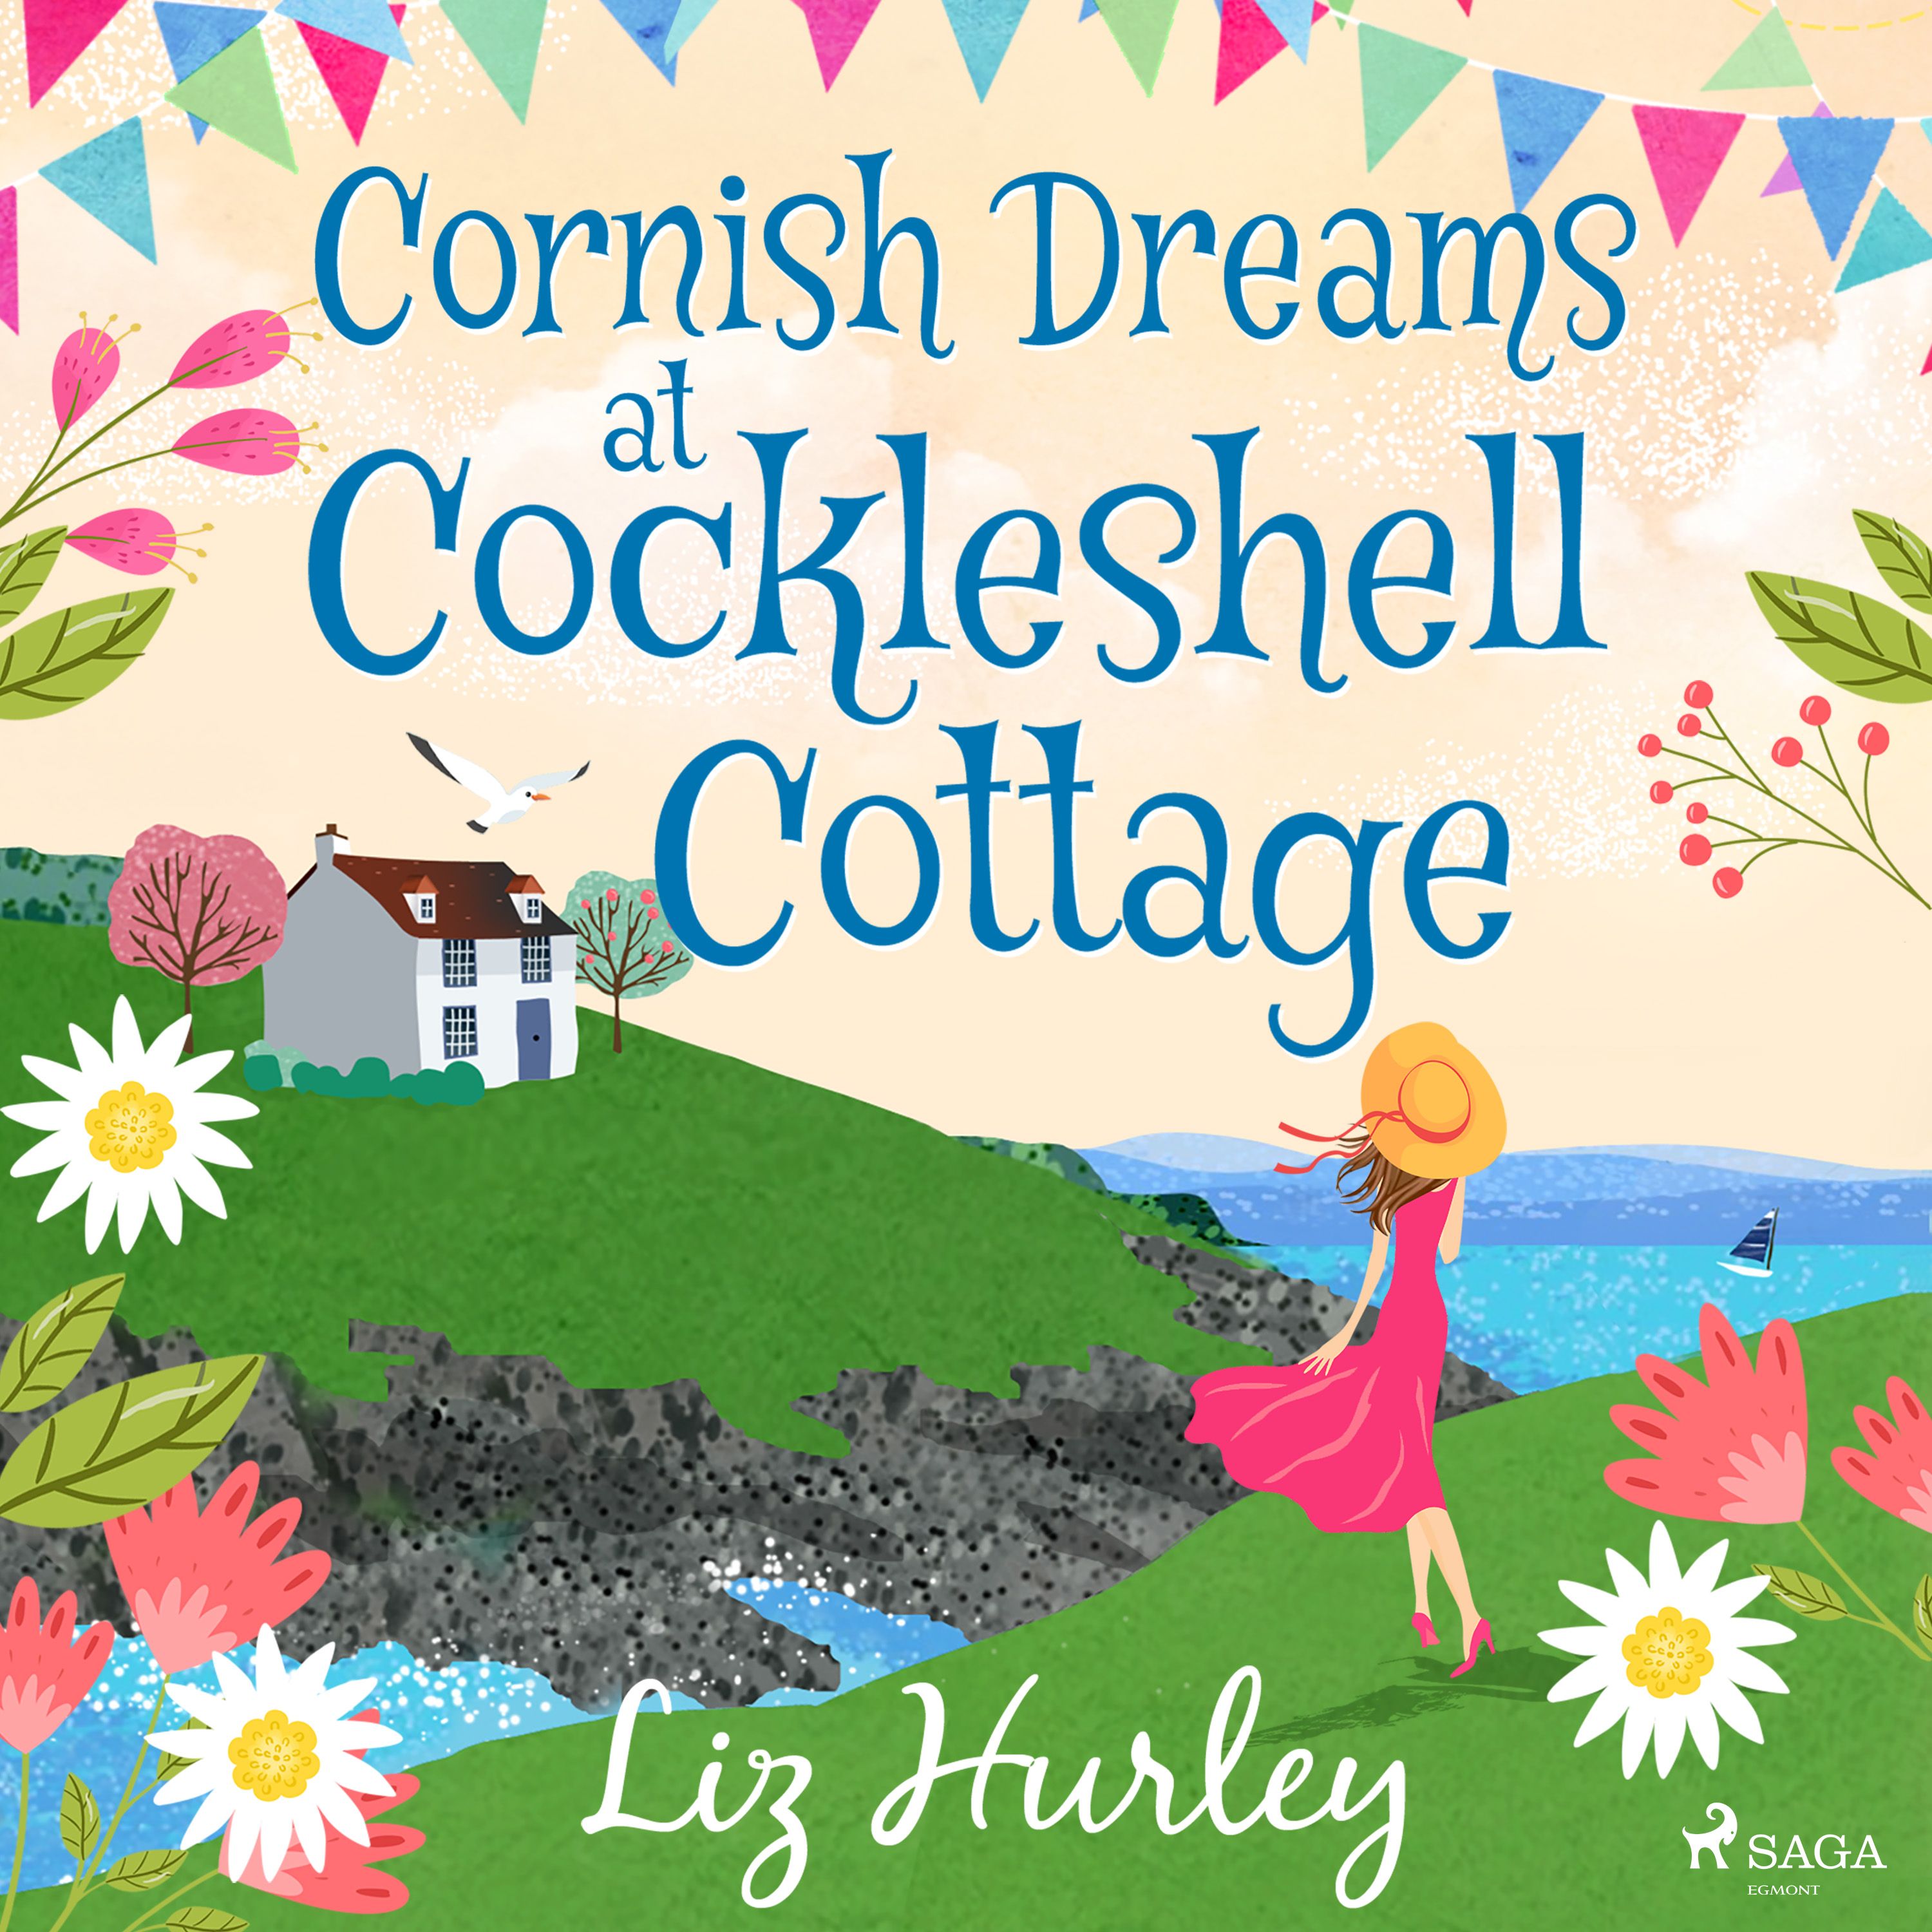 Cornish Dreams at Cockleshell Cottage, audiobook by Liz Hurley